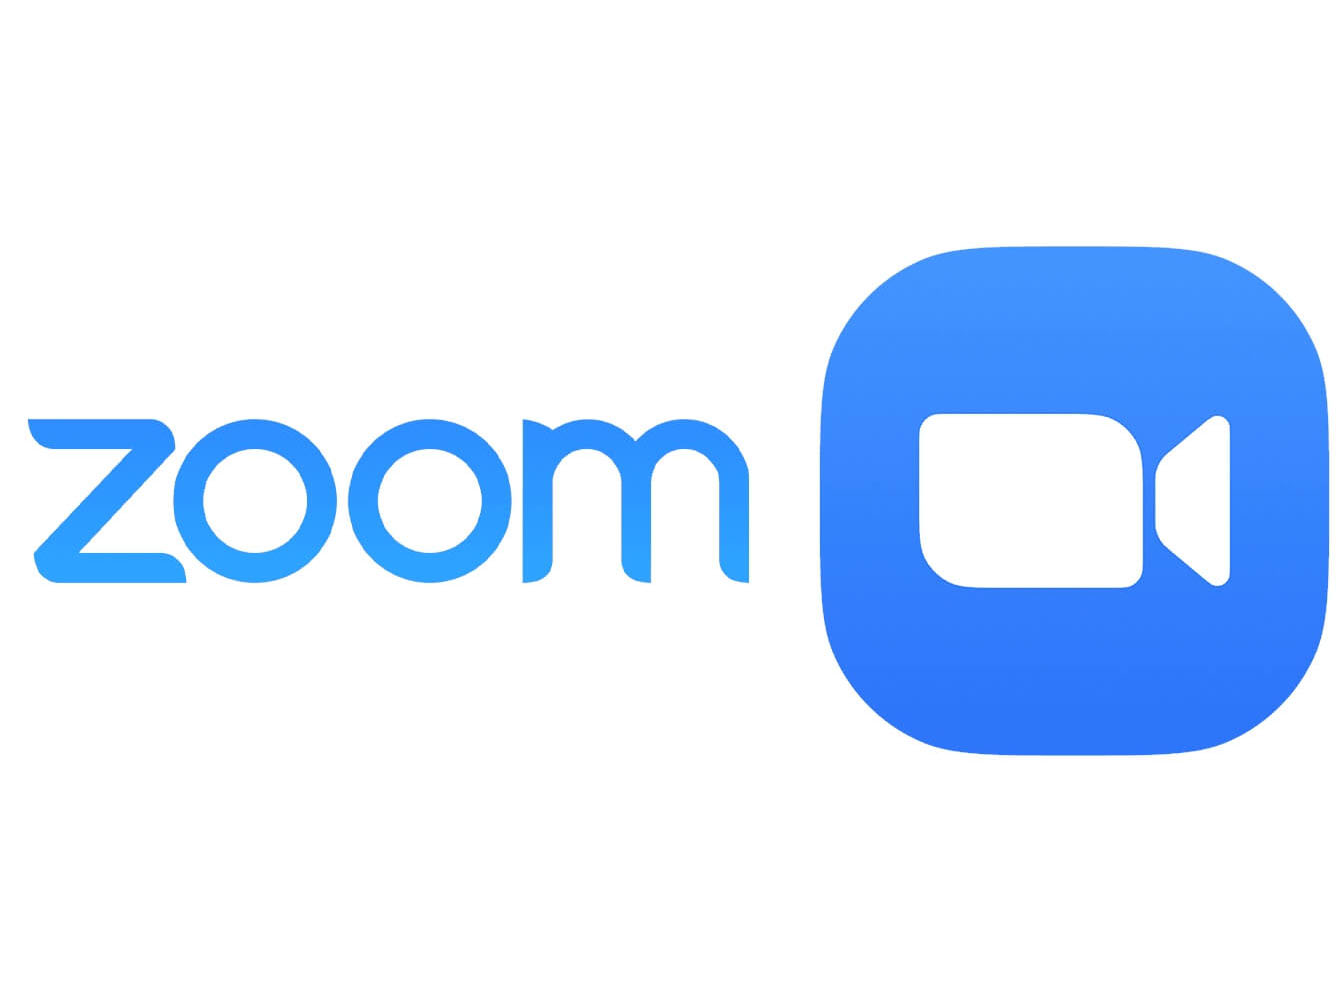 Zoom is the most downloaded business app in the U.S. 